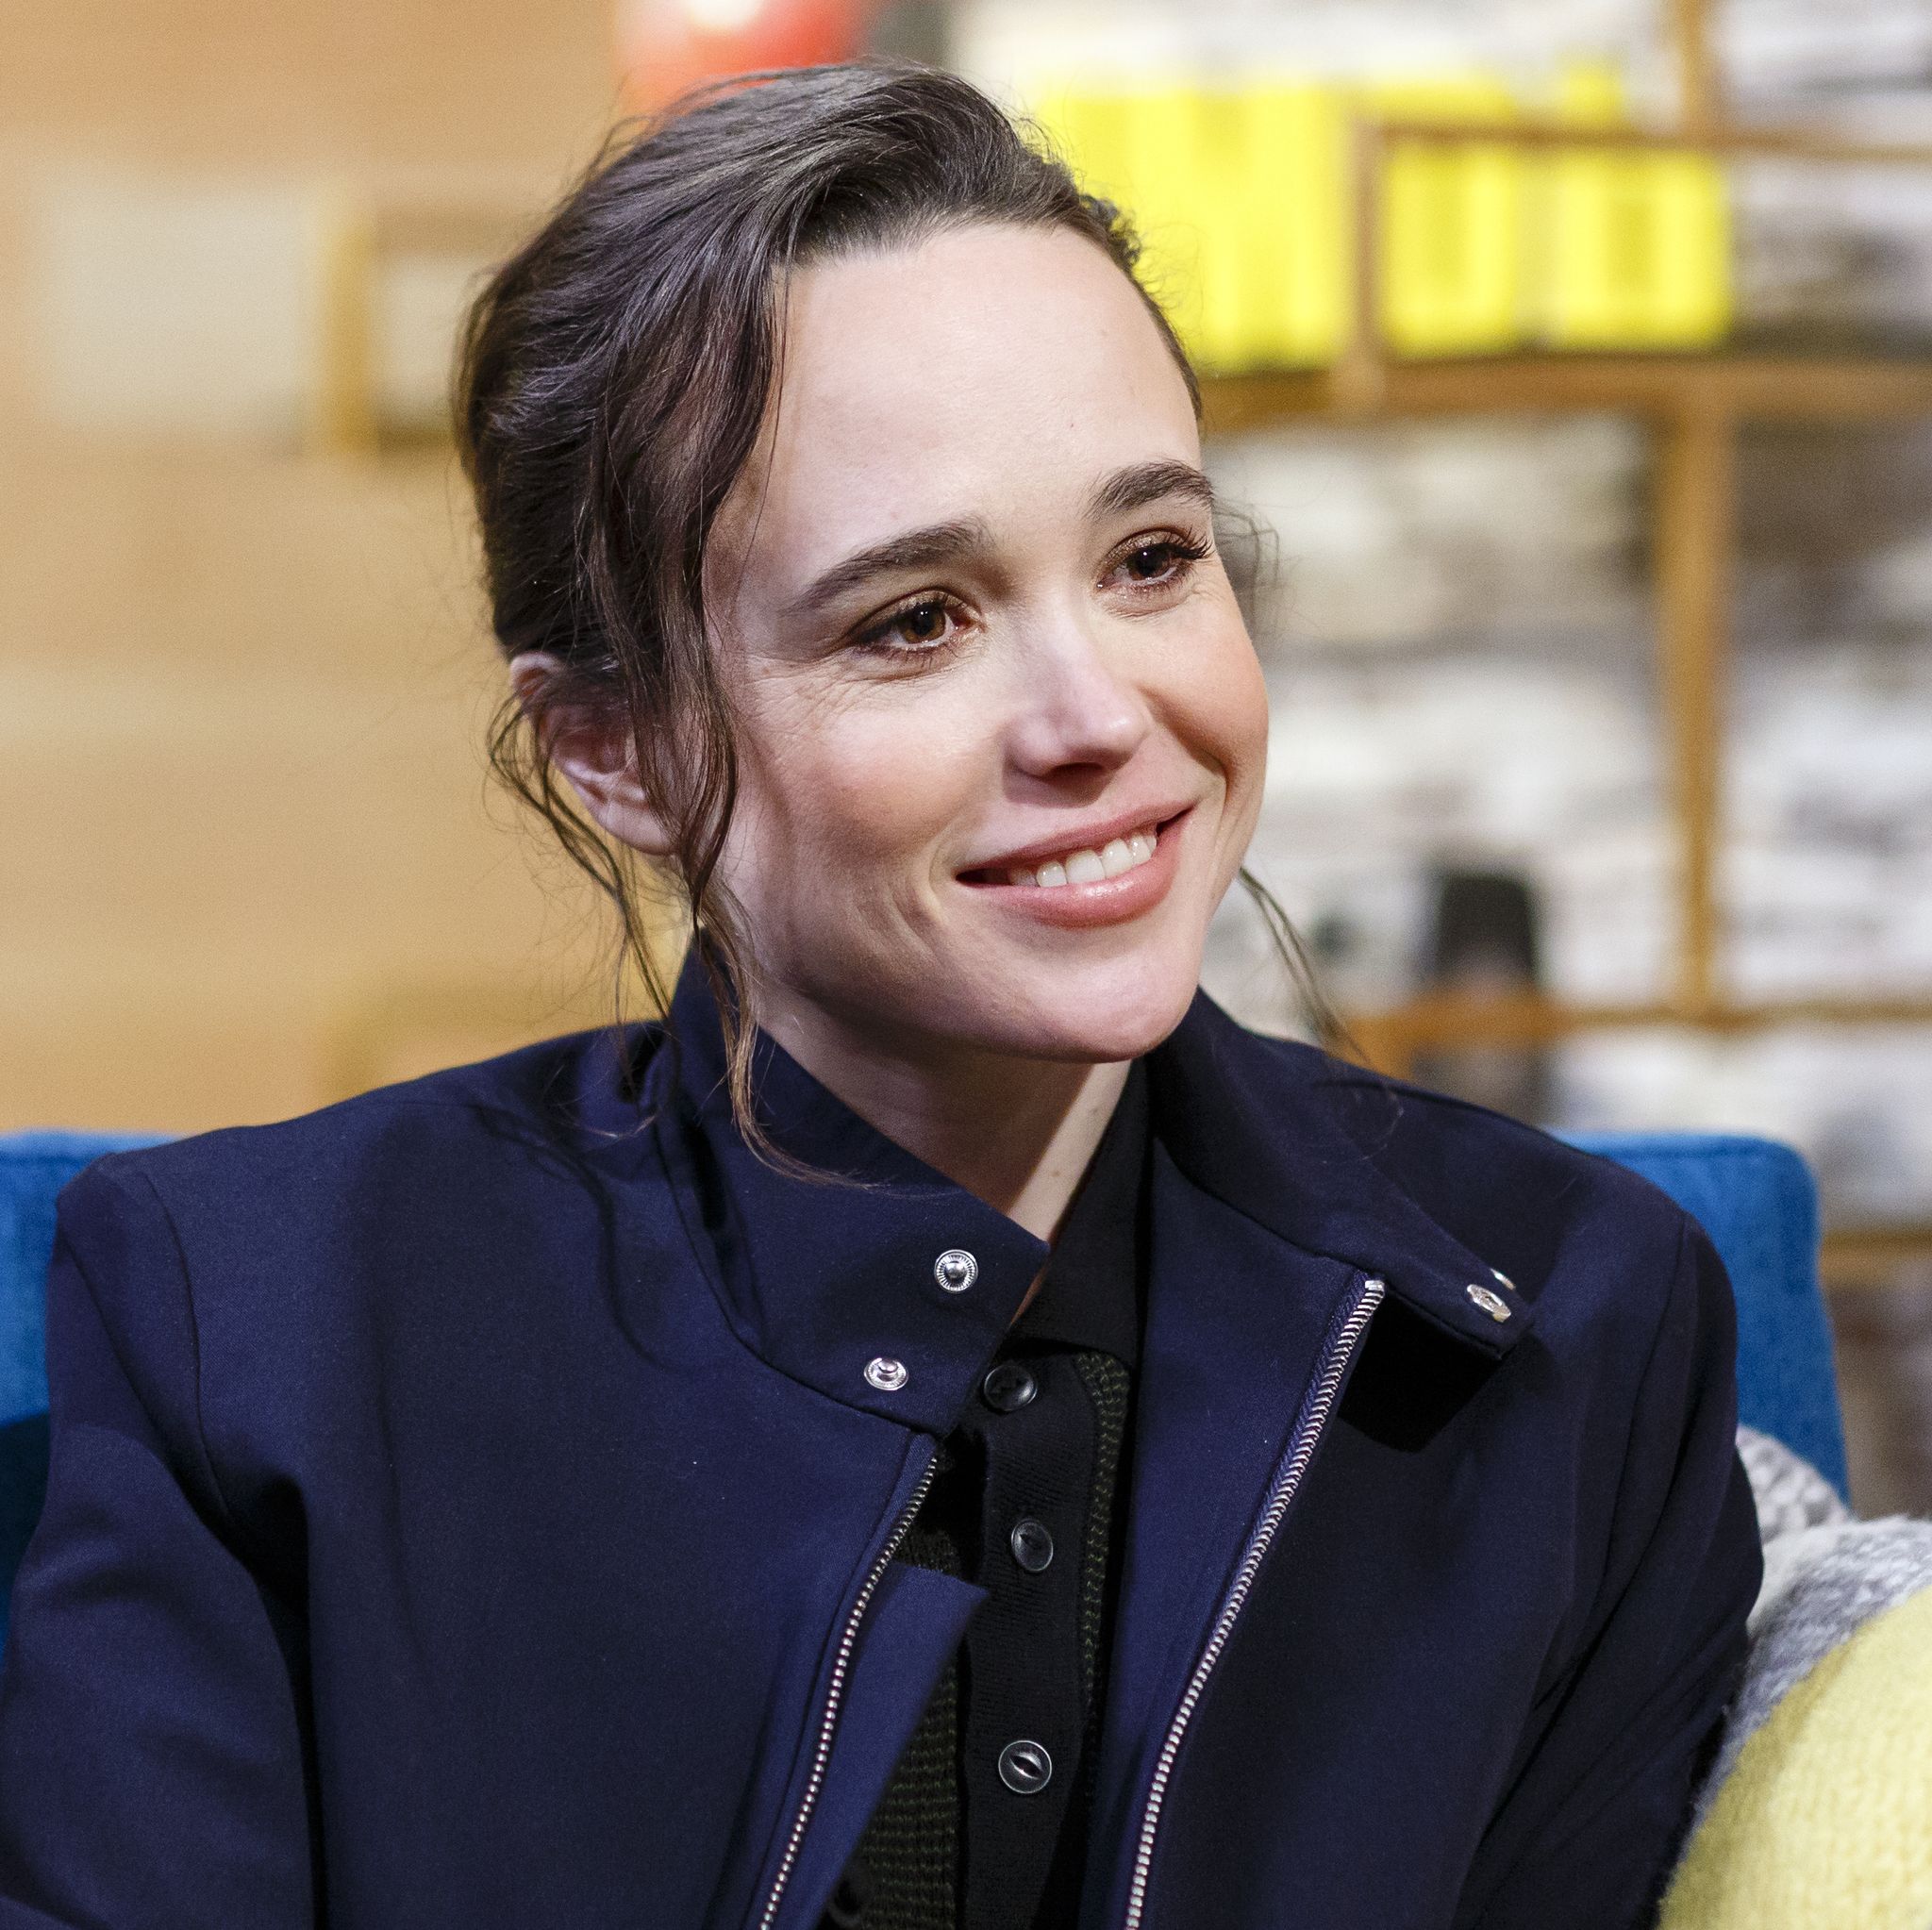 studio city, ca   february 20   actress ellen page visits the imdb show on feburary 20th 2018 in studio city, california the episode airs march 1st 2018  photo by rich polkgetty images for imdb